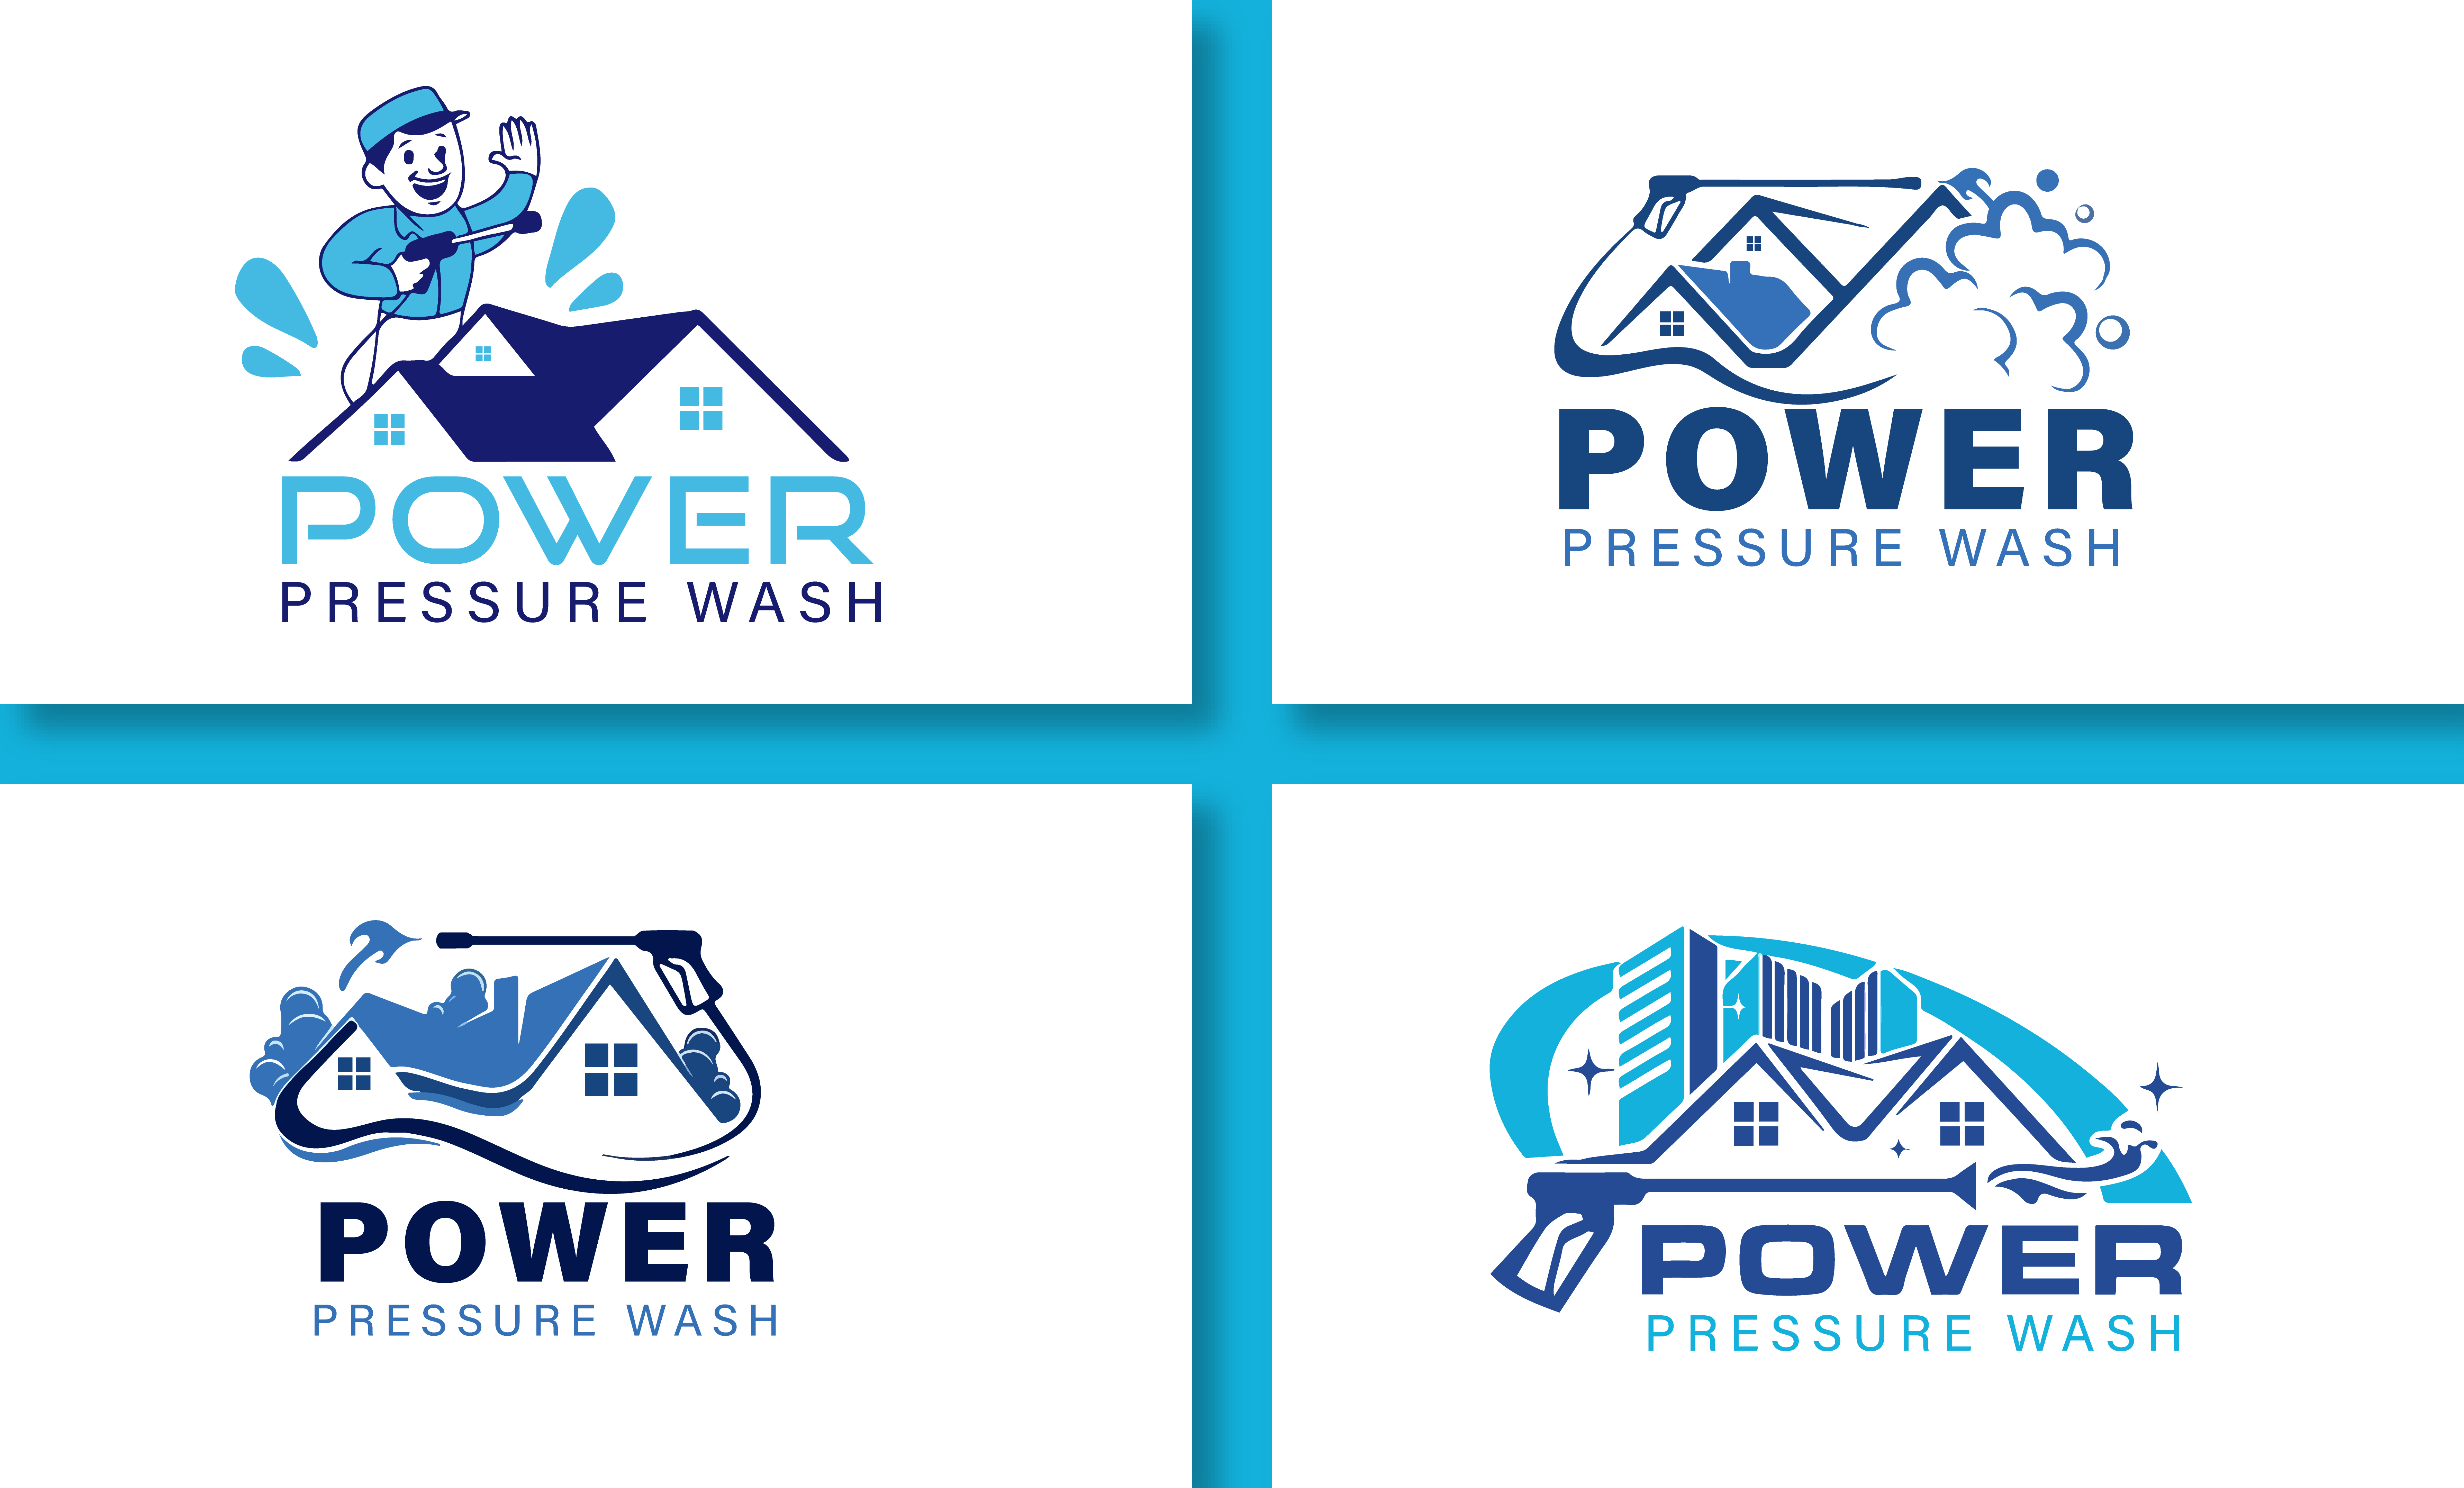 I will design pressure washing cleaning service power washing logo for you